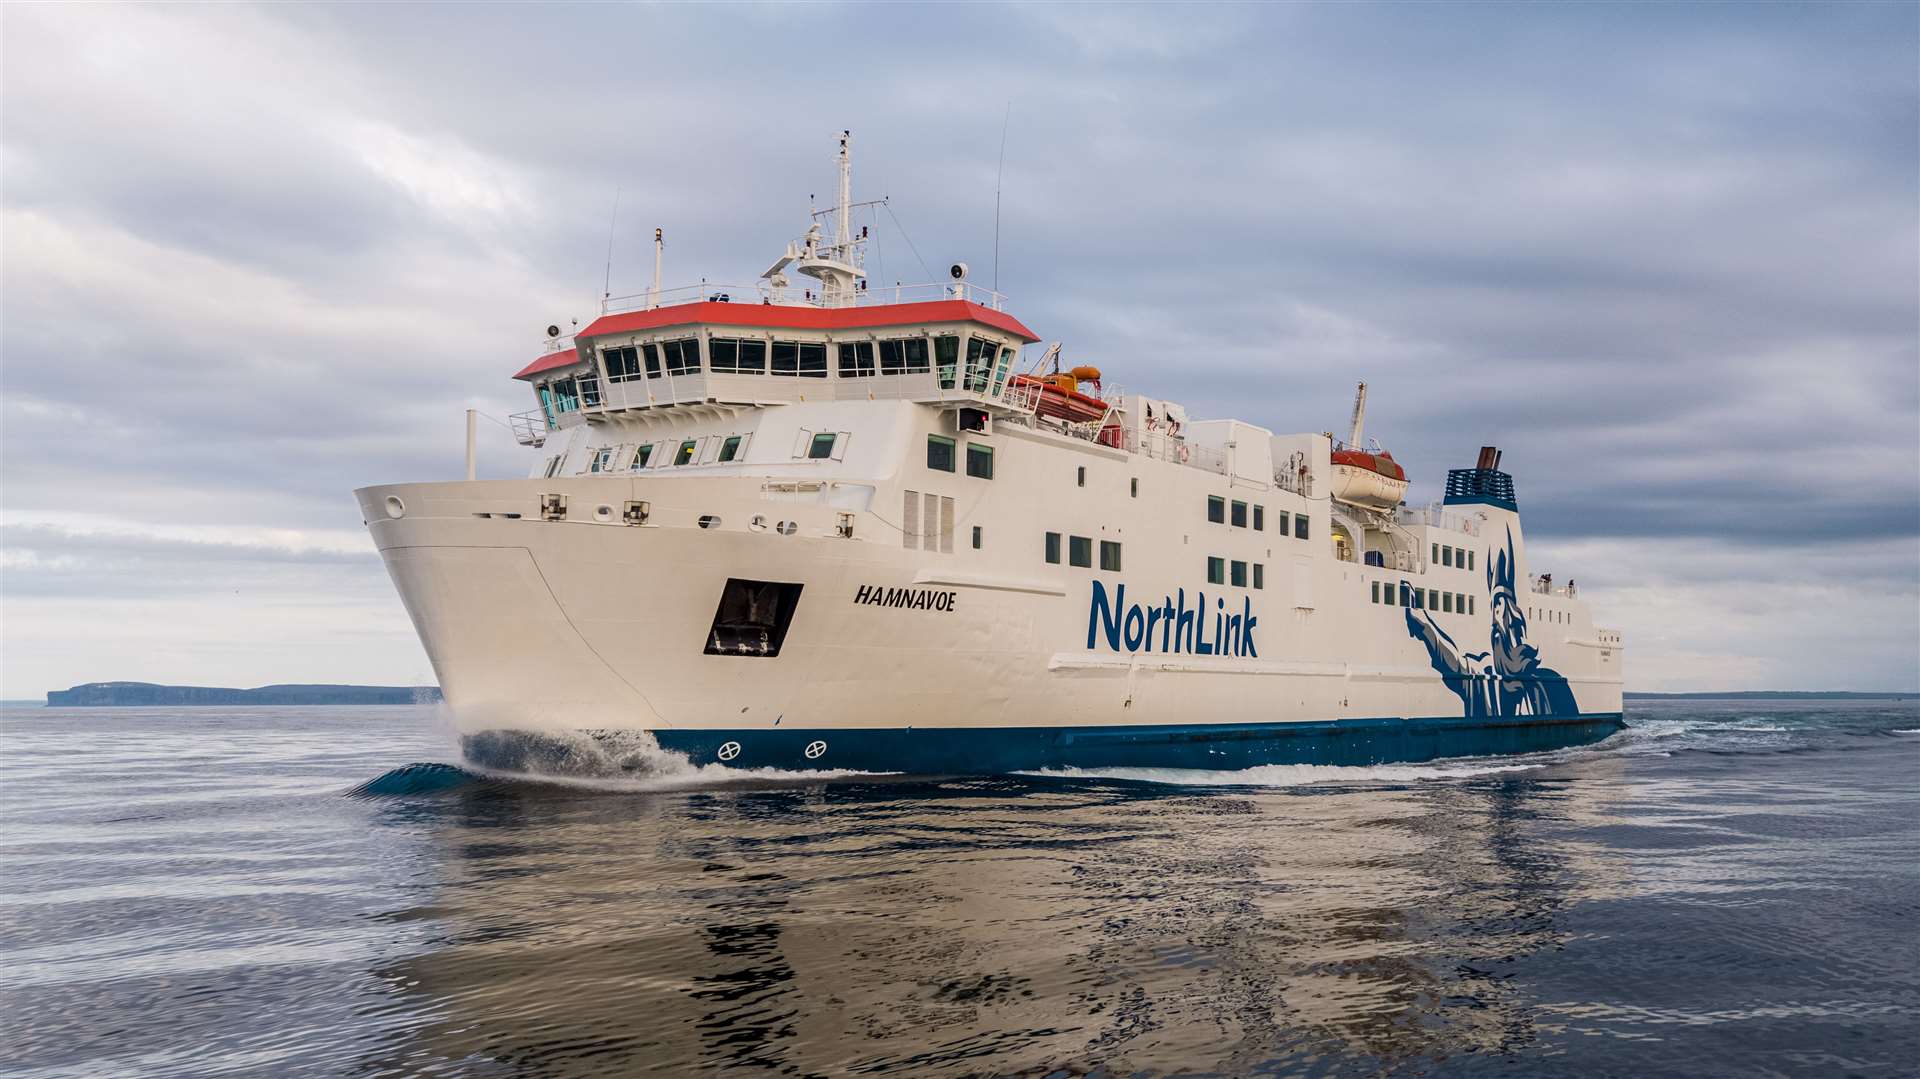 Capacity on the MV Hamnavoe is now set at 370. Picture: NorthLink Ferries